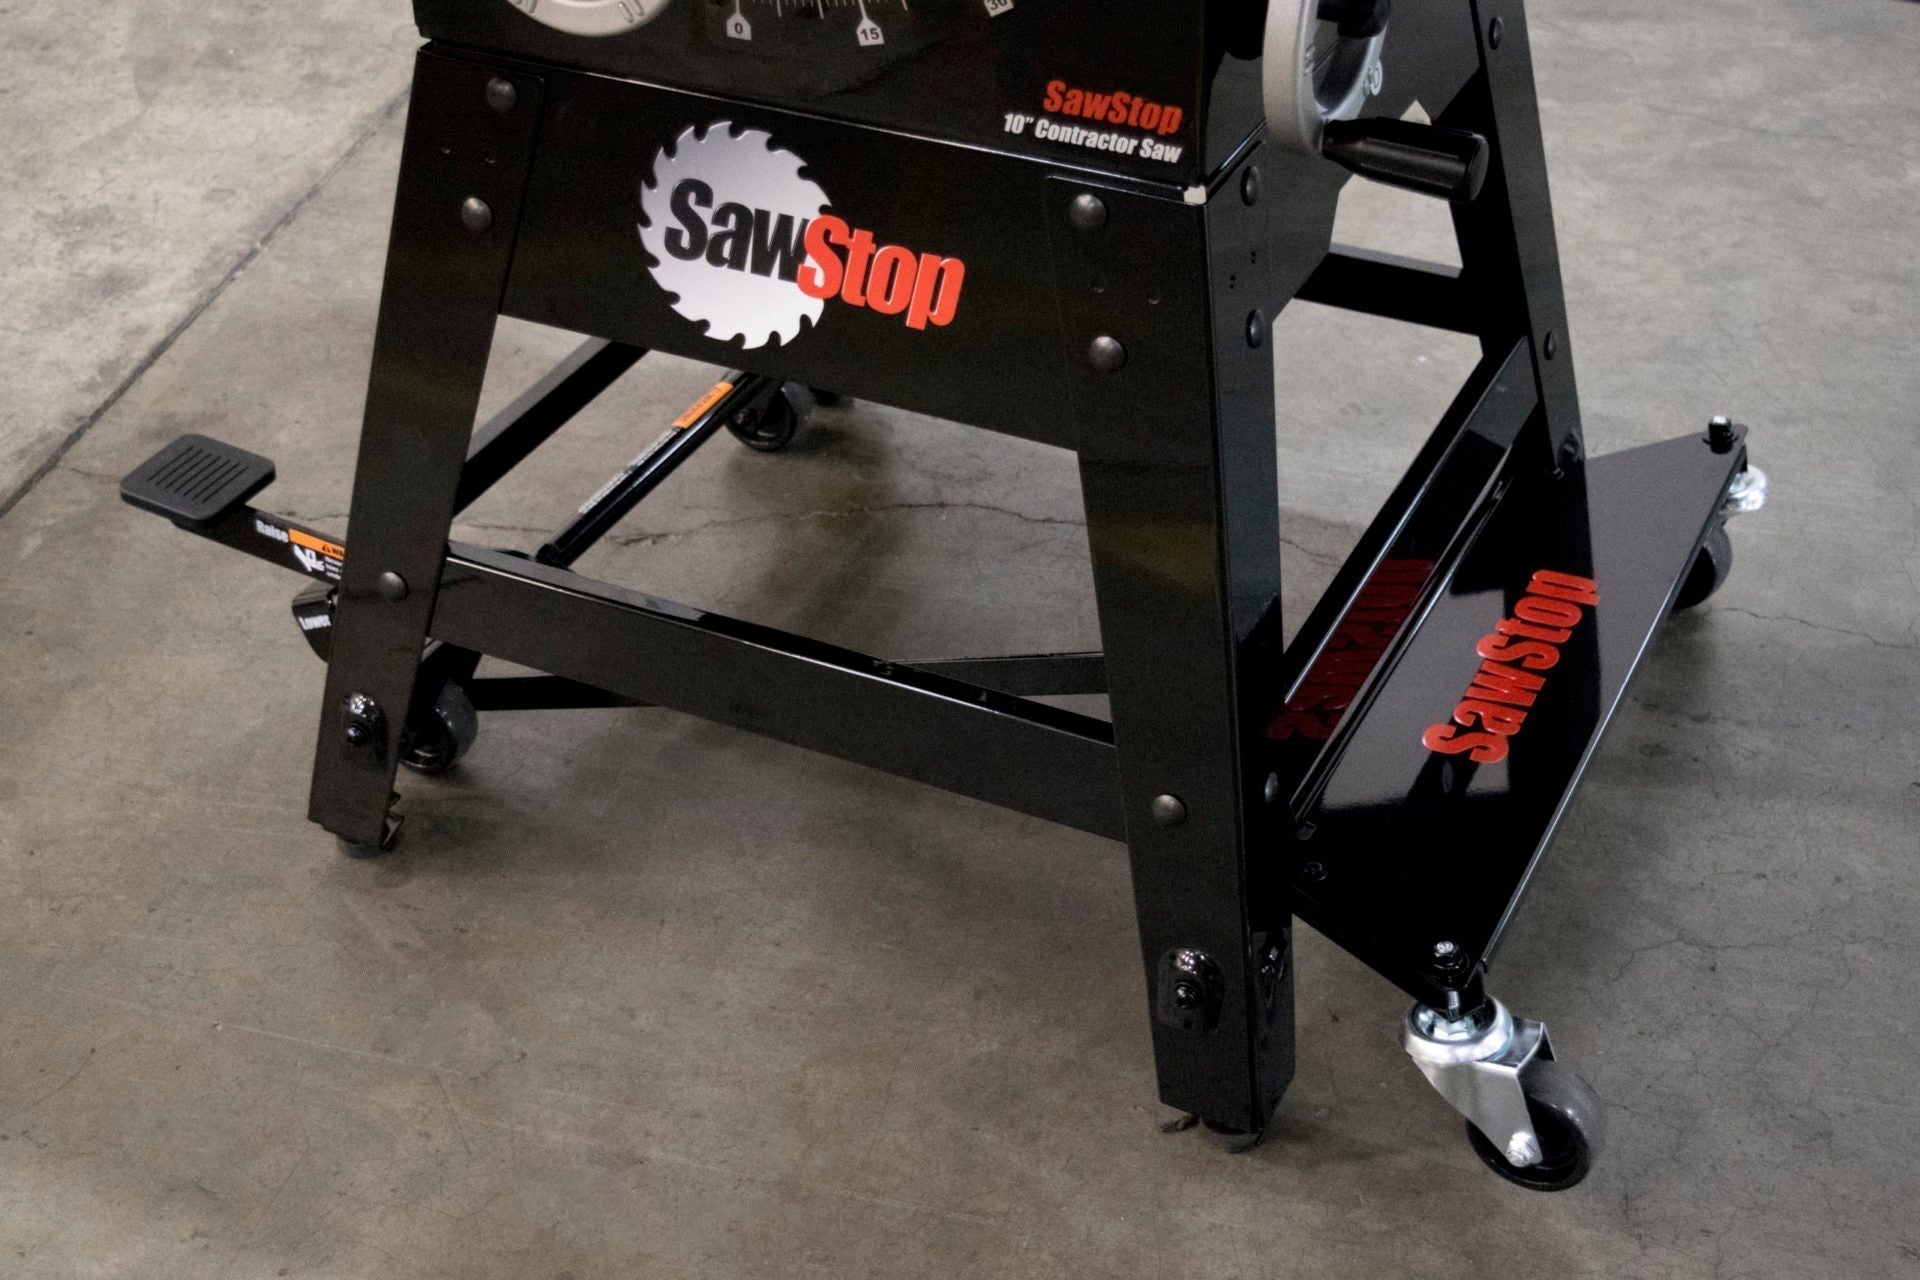 Sawstop Contractor Saw Mobile Base MB-CNS-000 Power Tool Services